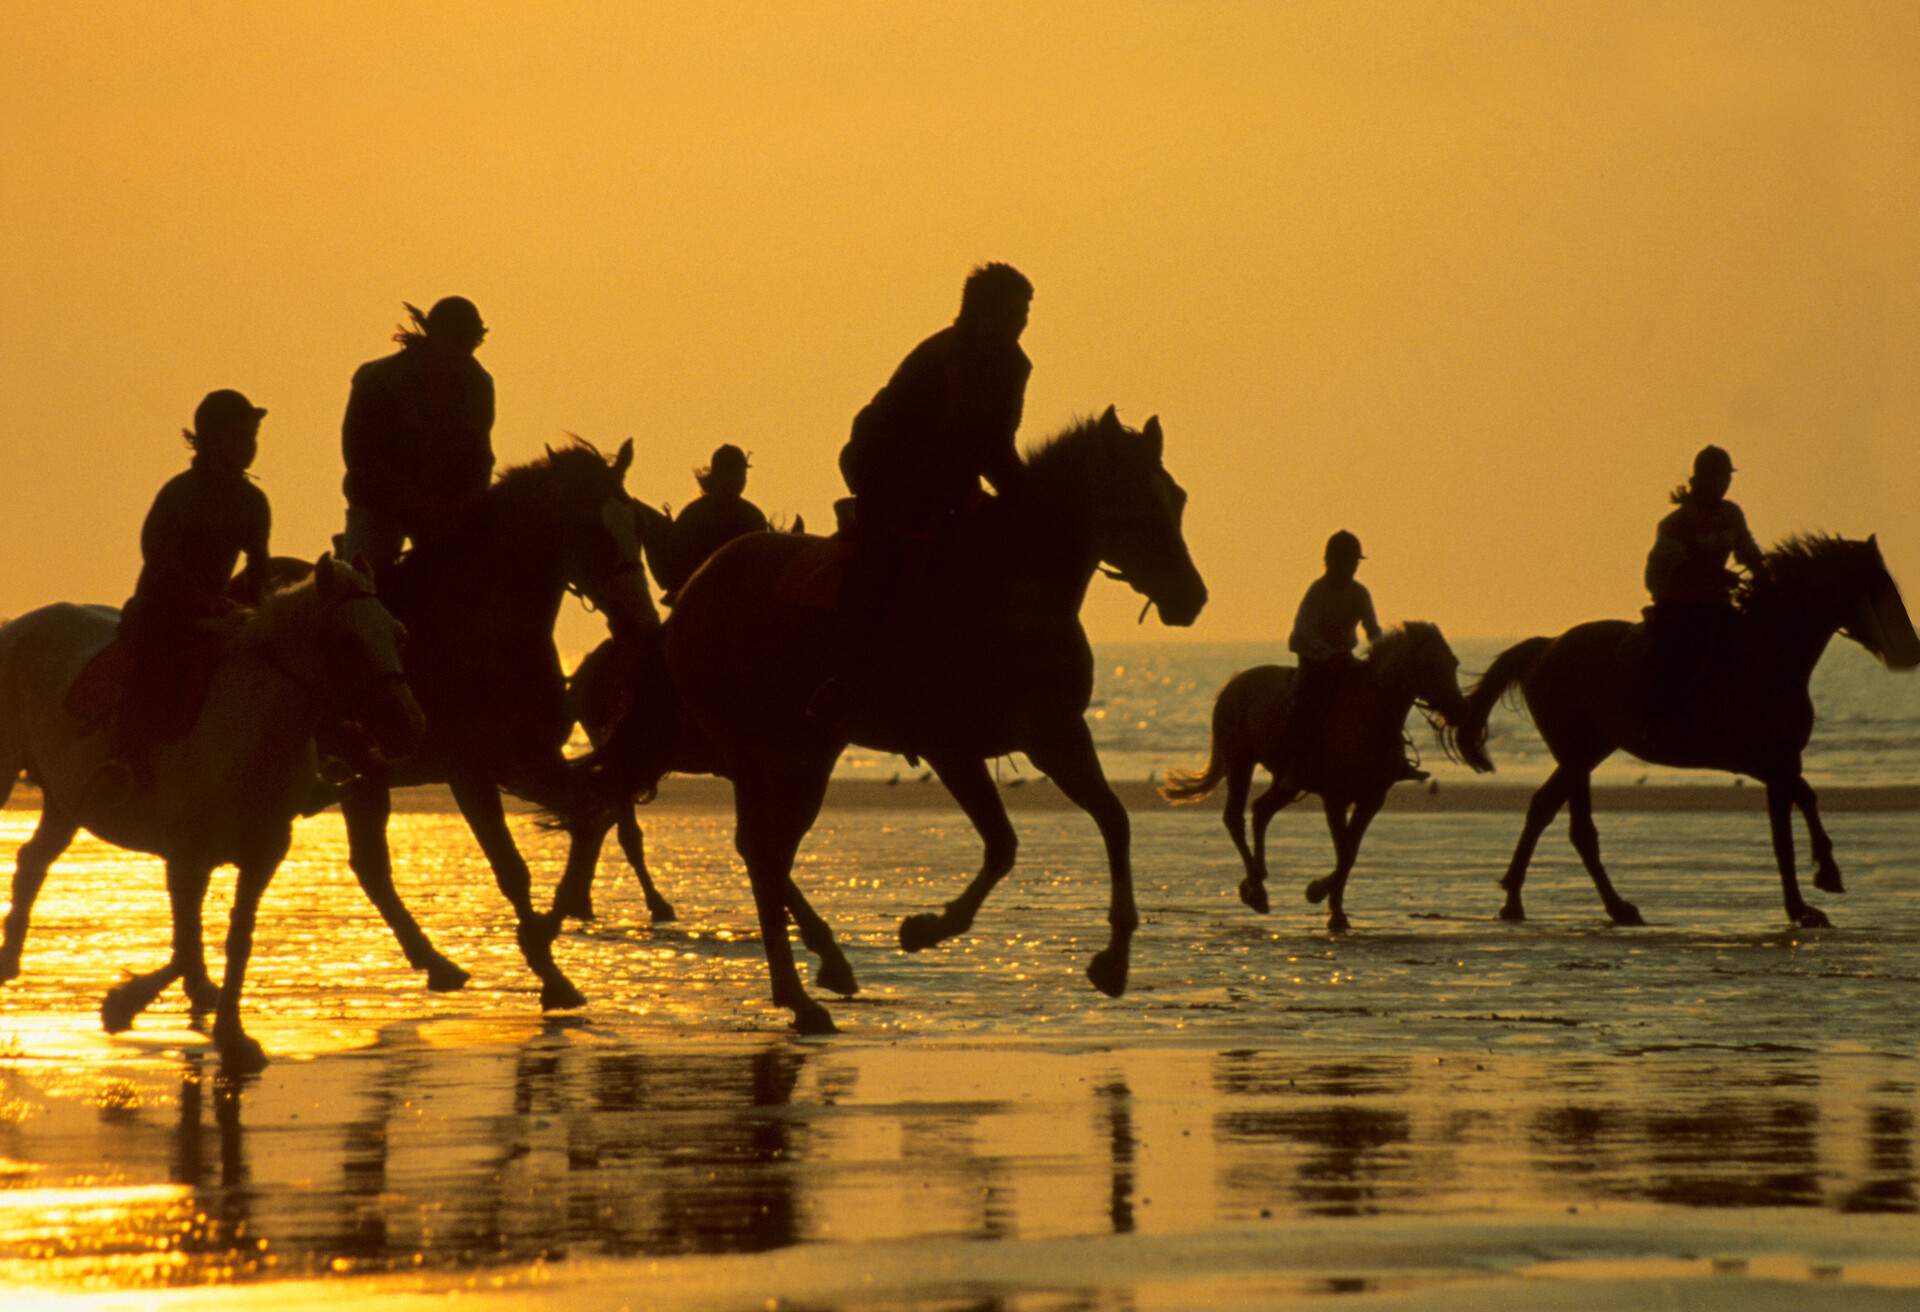 dest_france_deauville-beach_theme_horses_riding_people-gettyimages-549820955_universal_within-usage-period_82026.jpg